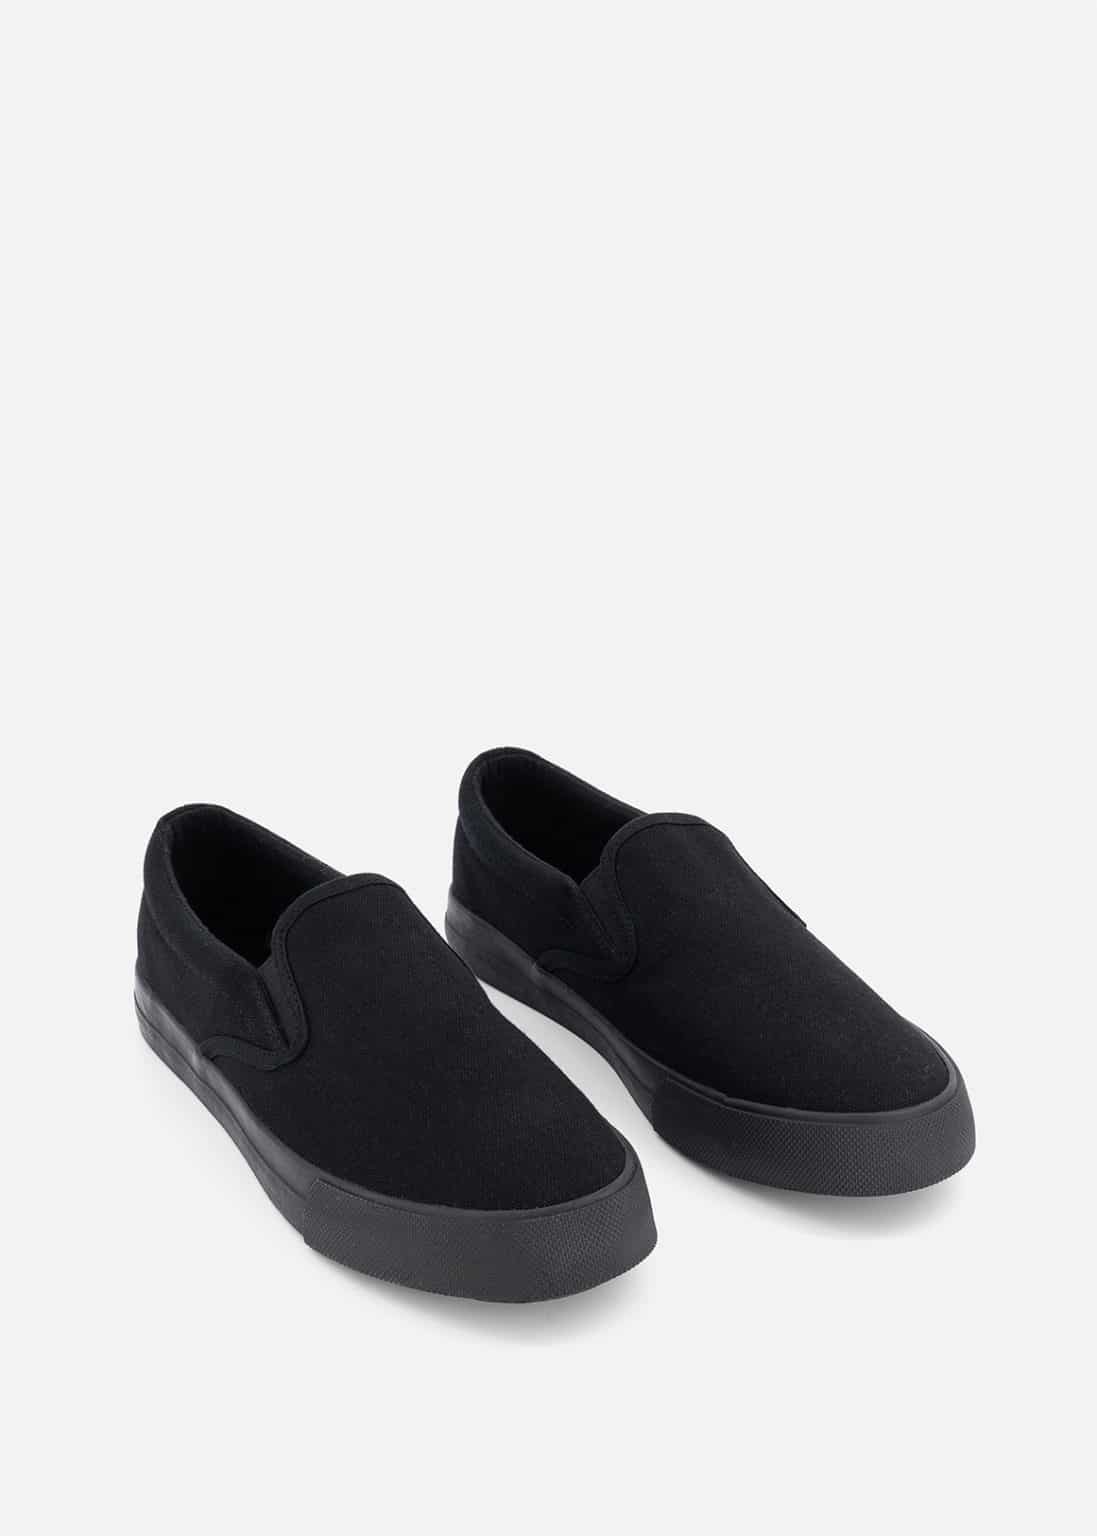 SS22 Slip On Sneaker - Woolworths Mauritius Online